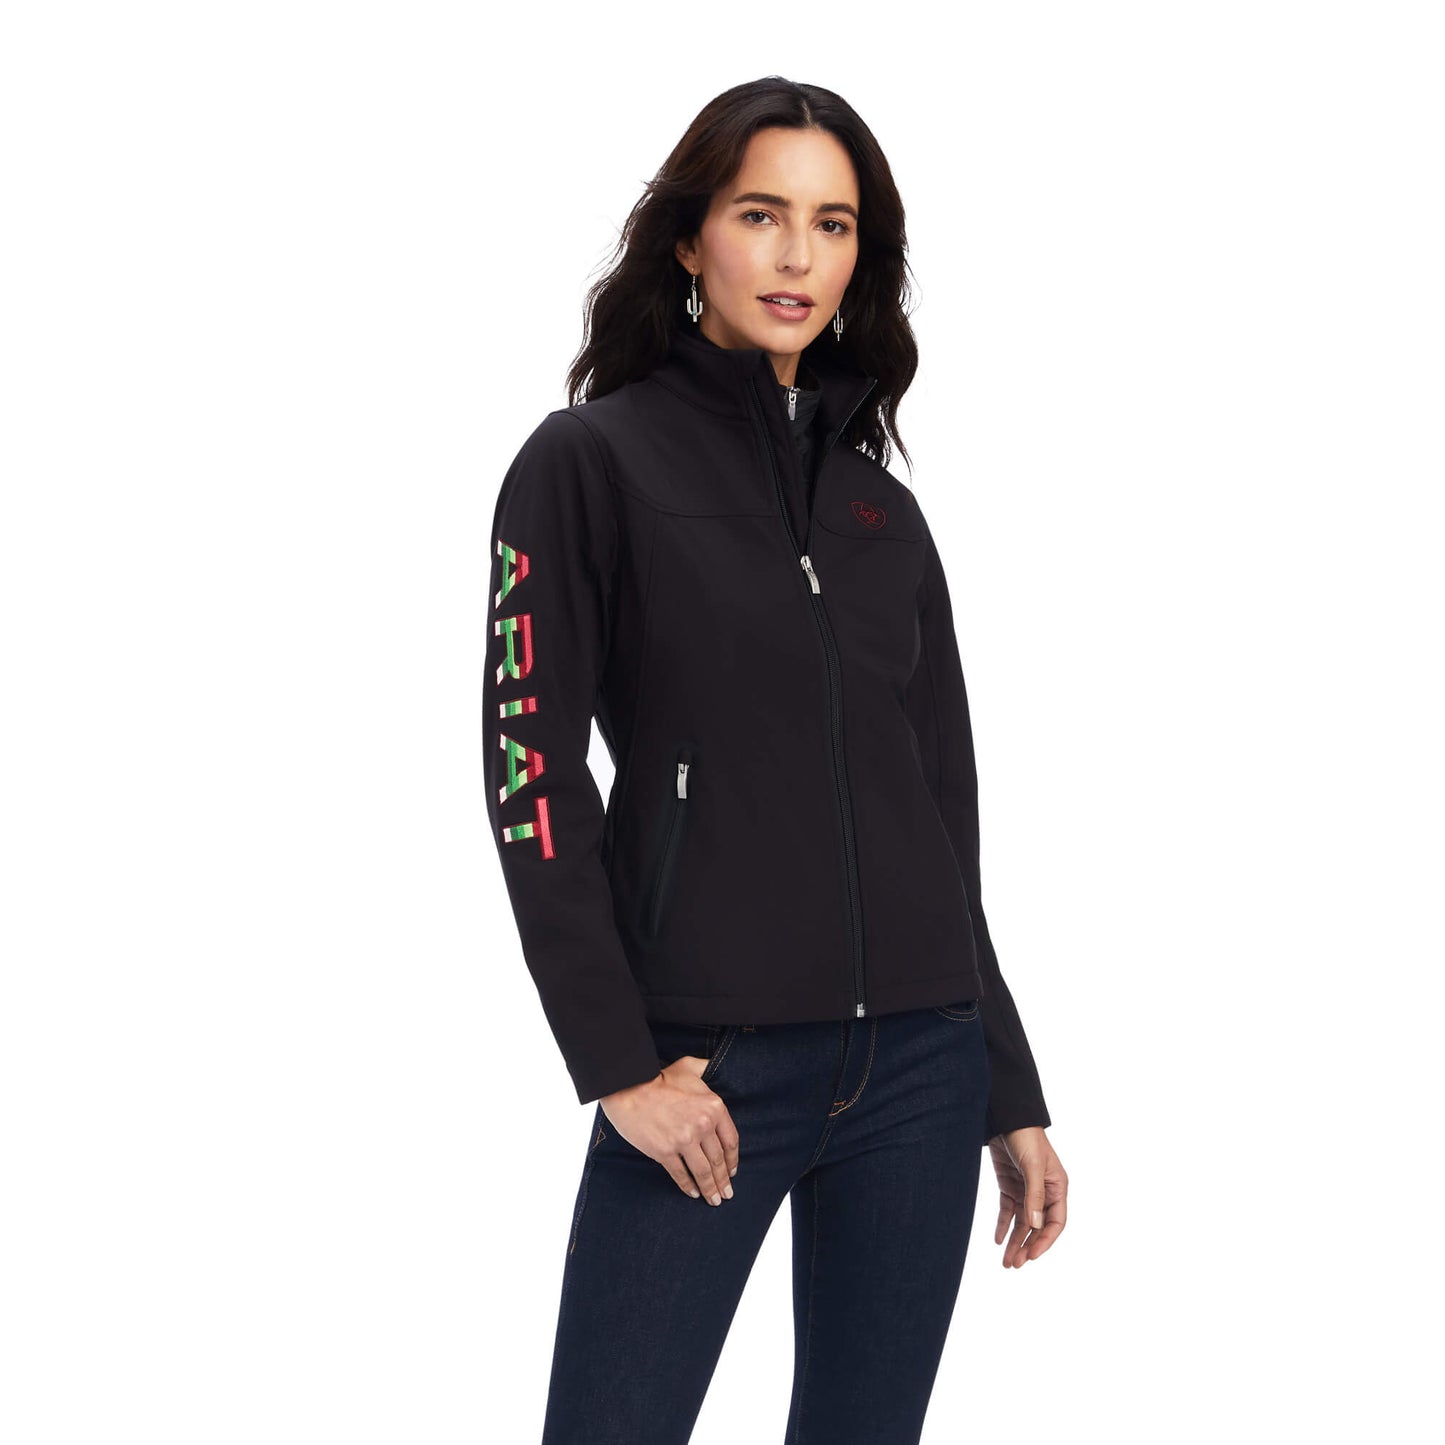 Ariat Floral Embroidered Team Softshell Jacket